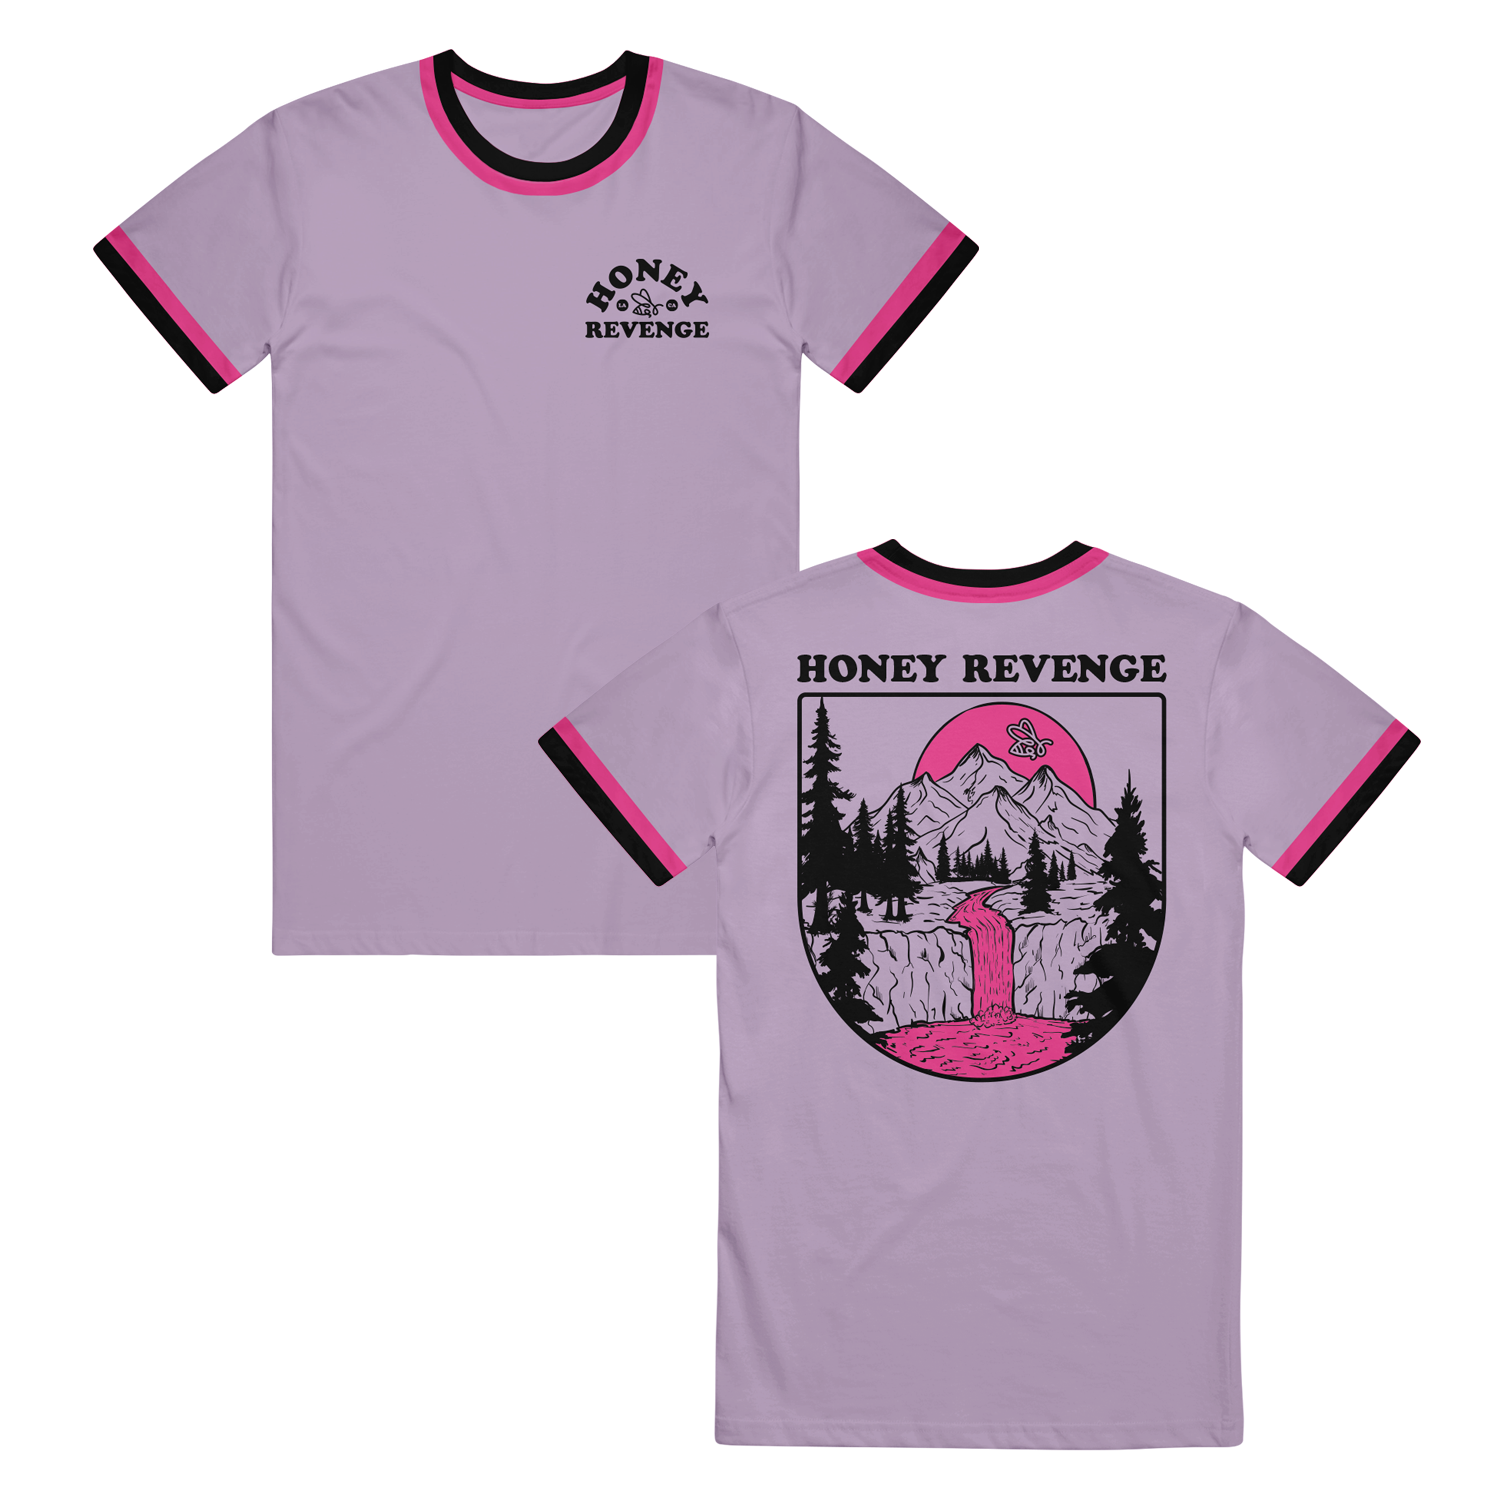 Waterfall Pink/Black tee front and back